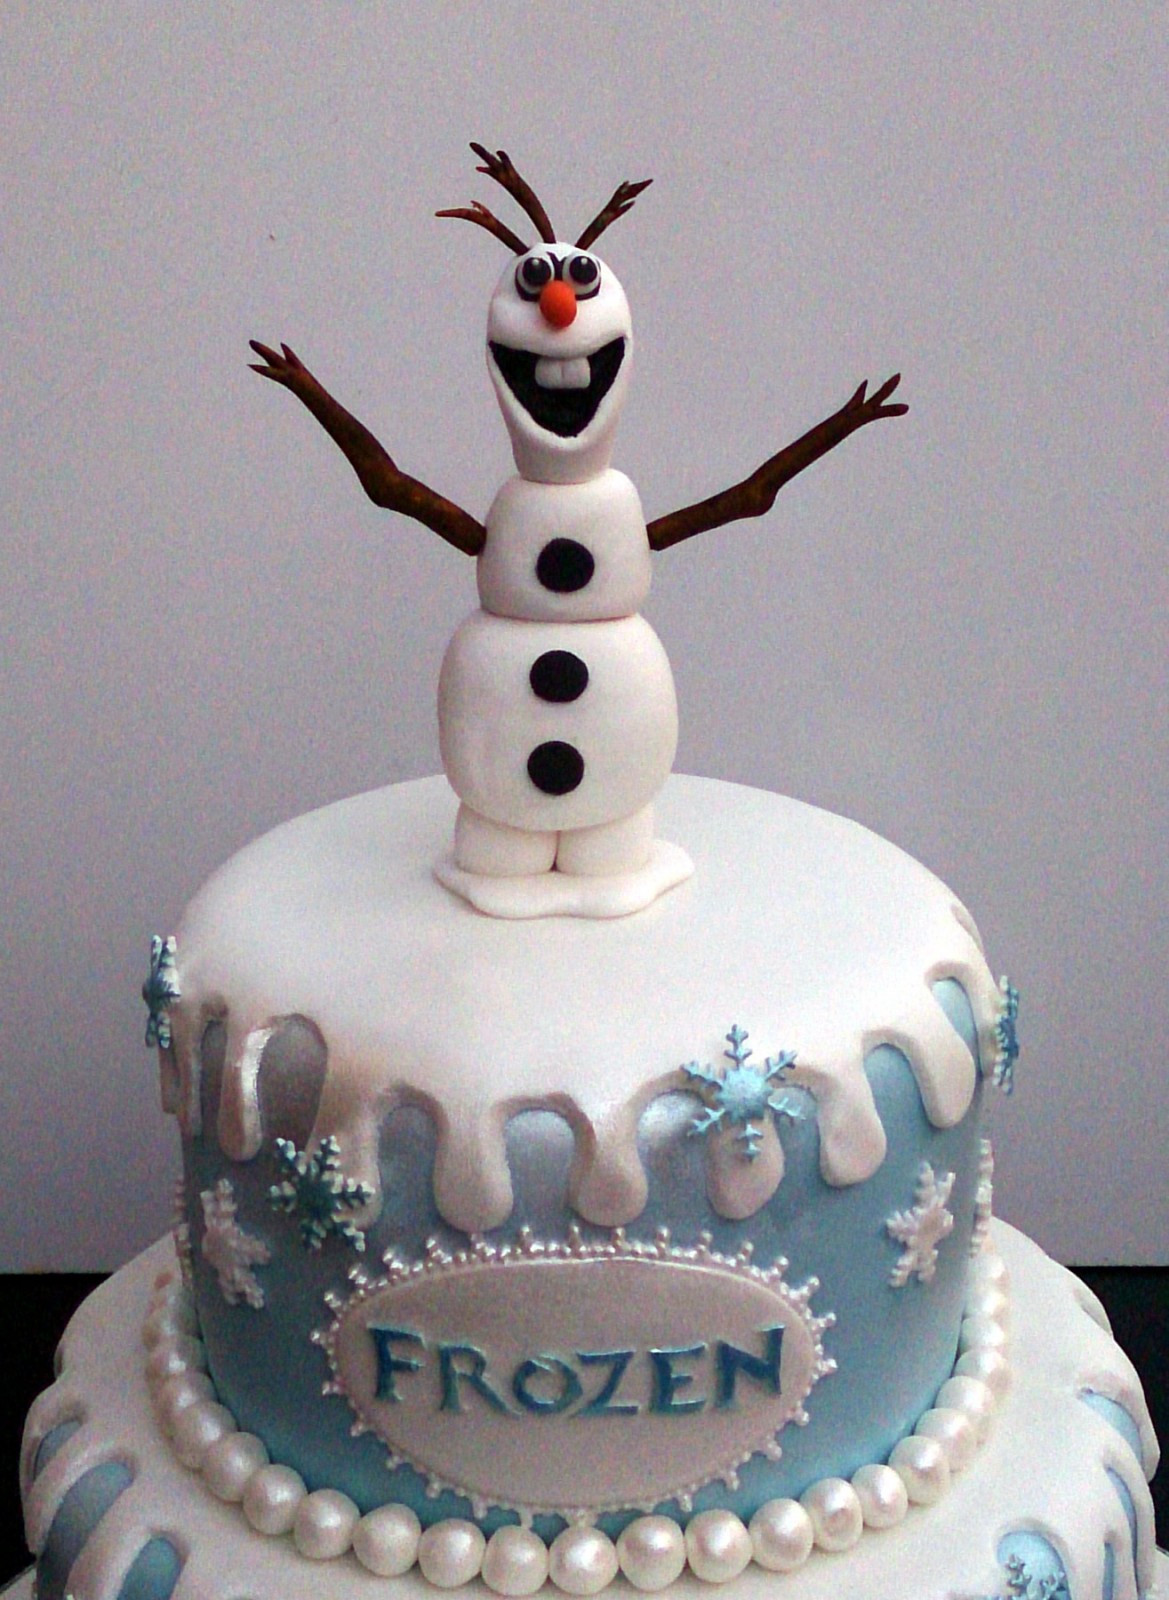 Frozen Themed Birthday Cake
 Disney Frozen Themed Cake With Olaf Anna and Elsa Susie